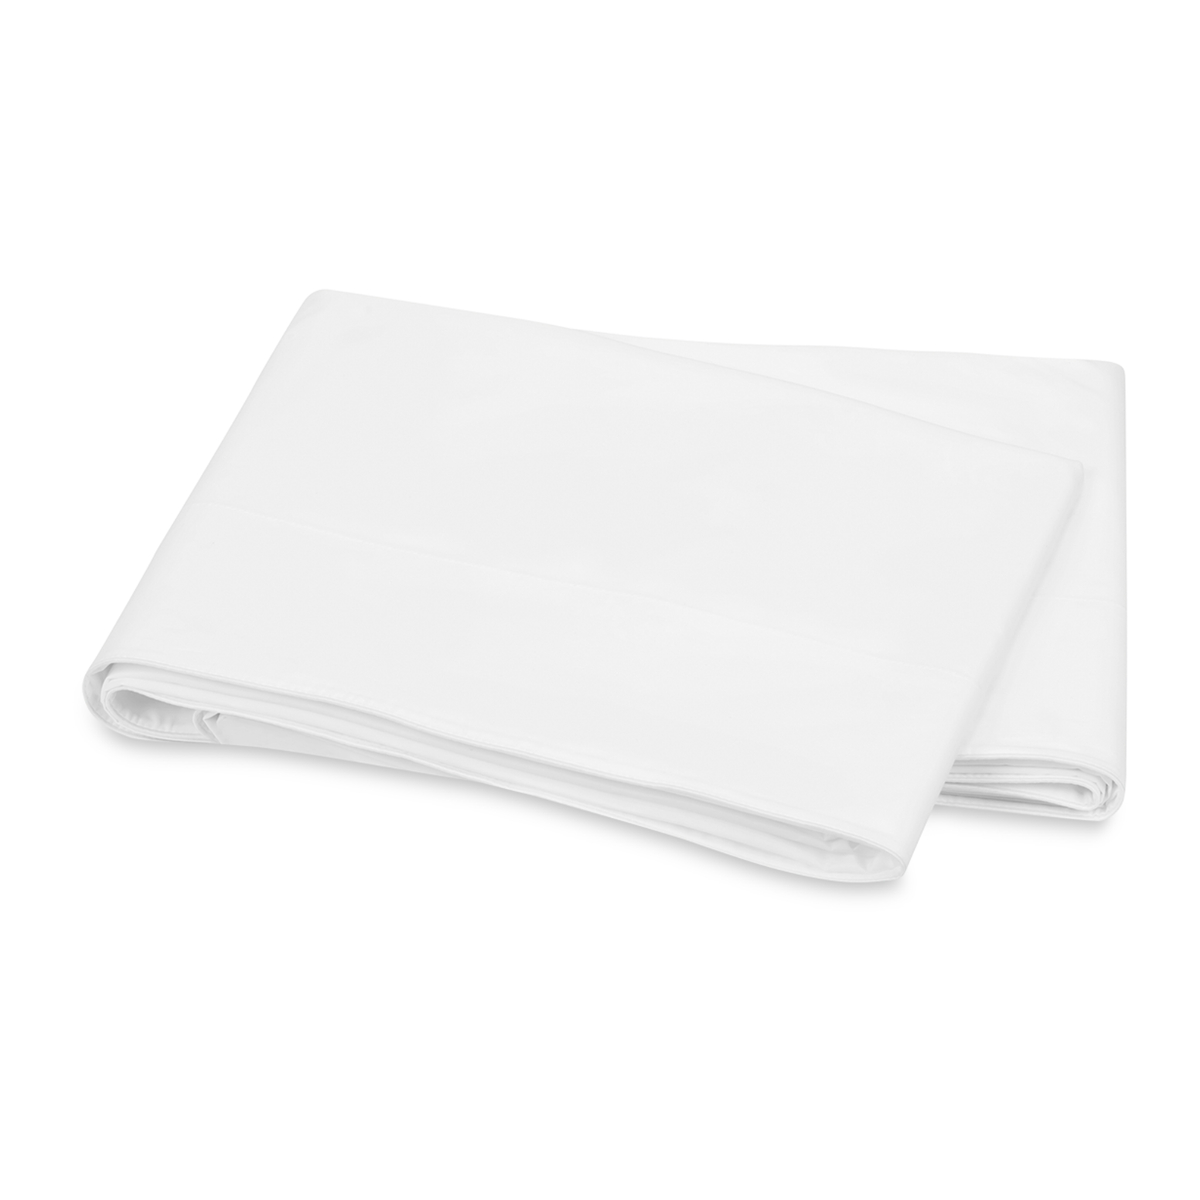 Folded Flat Sheet of Matouk Bryant Bedding in White Color